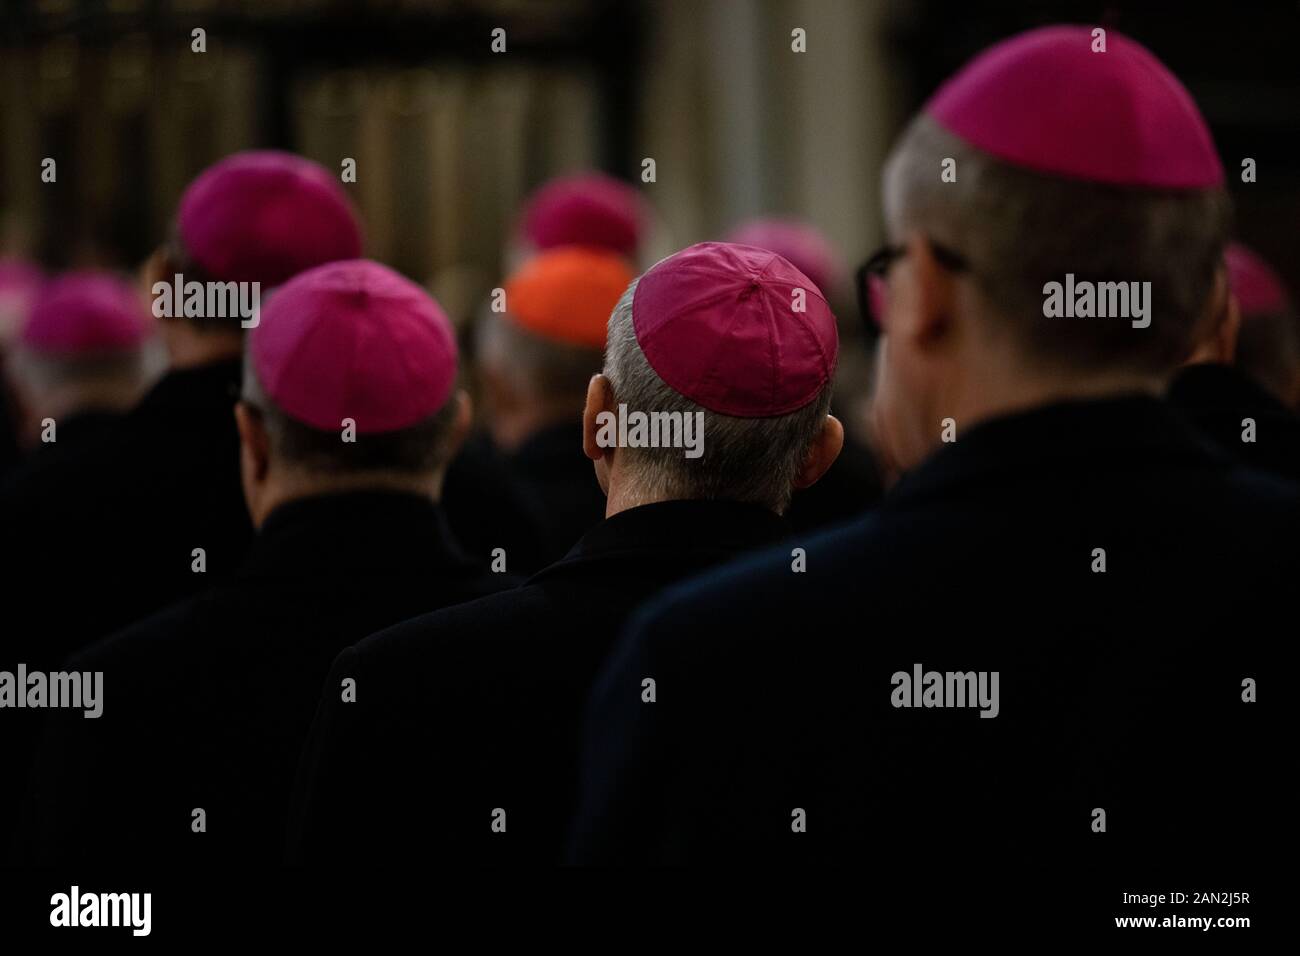 close -up of clerics in the amaranth zucchetto (form-fitting ecclesiastical skullcap) praying during the mass in the chapel Stock Photo